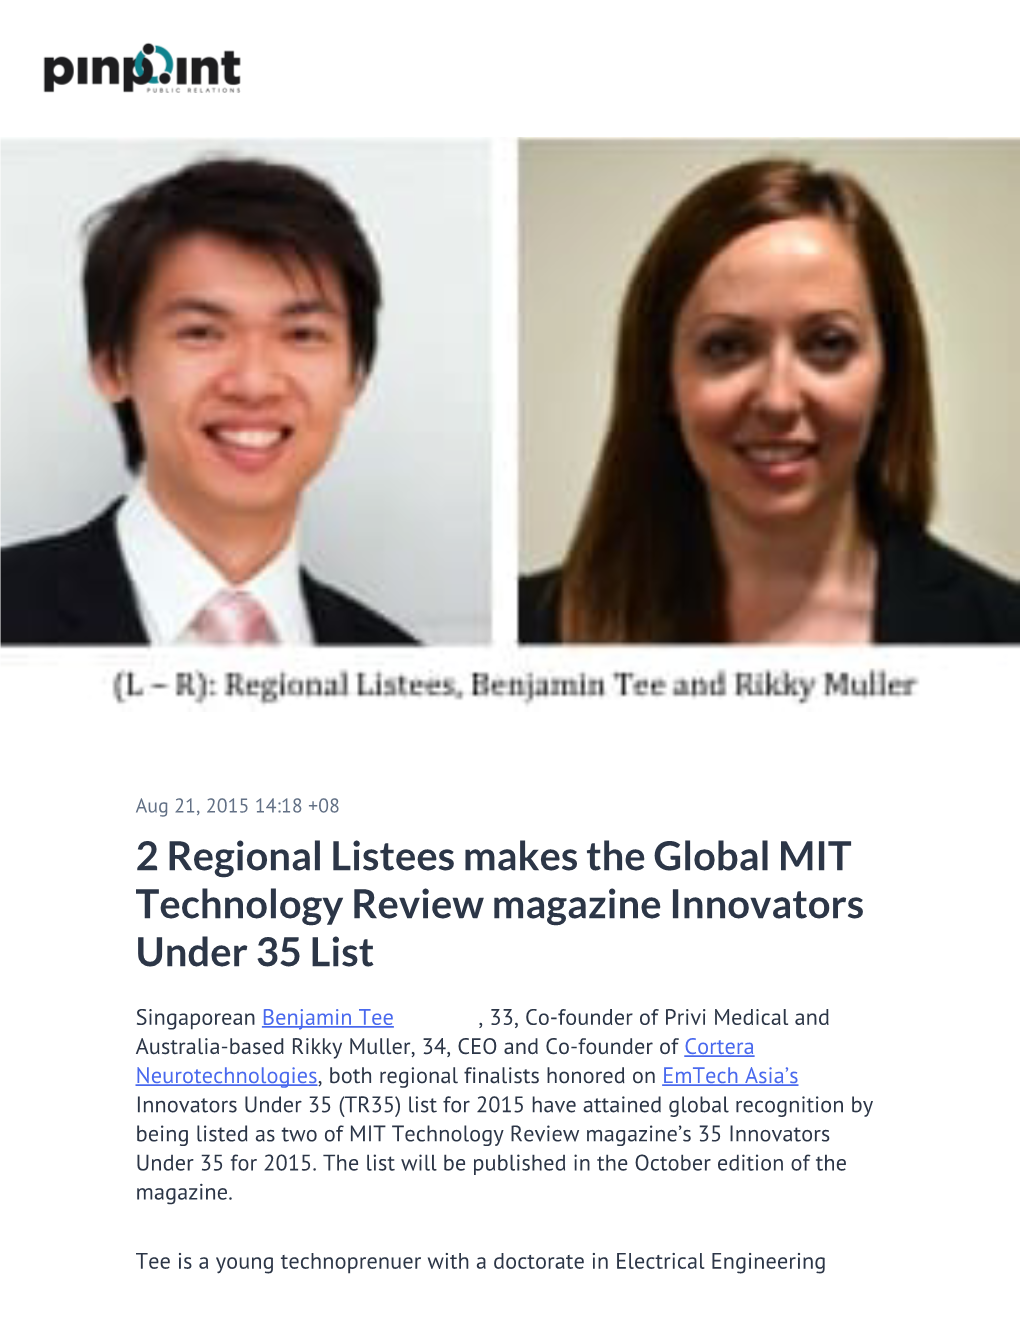 2 Regional Listees Makes the Global MIT Technology Review Magazine Innovators Under 35 List